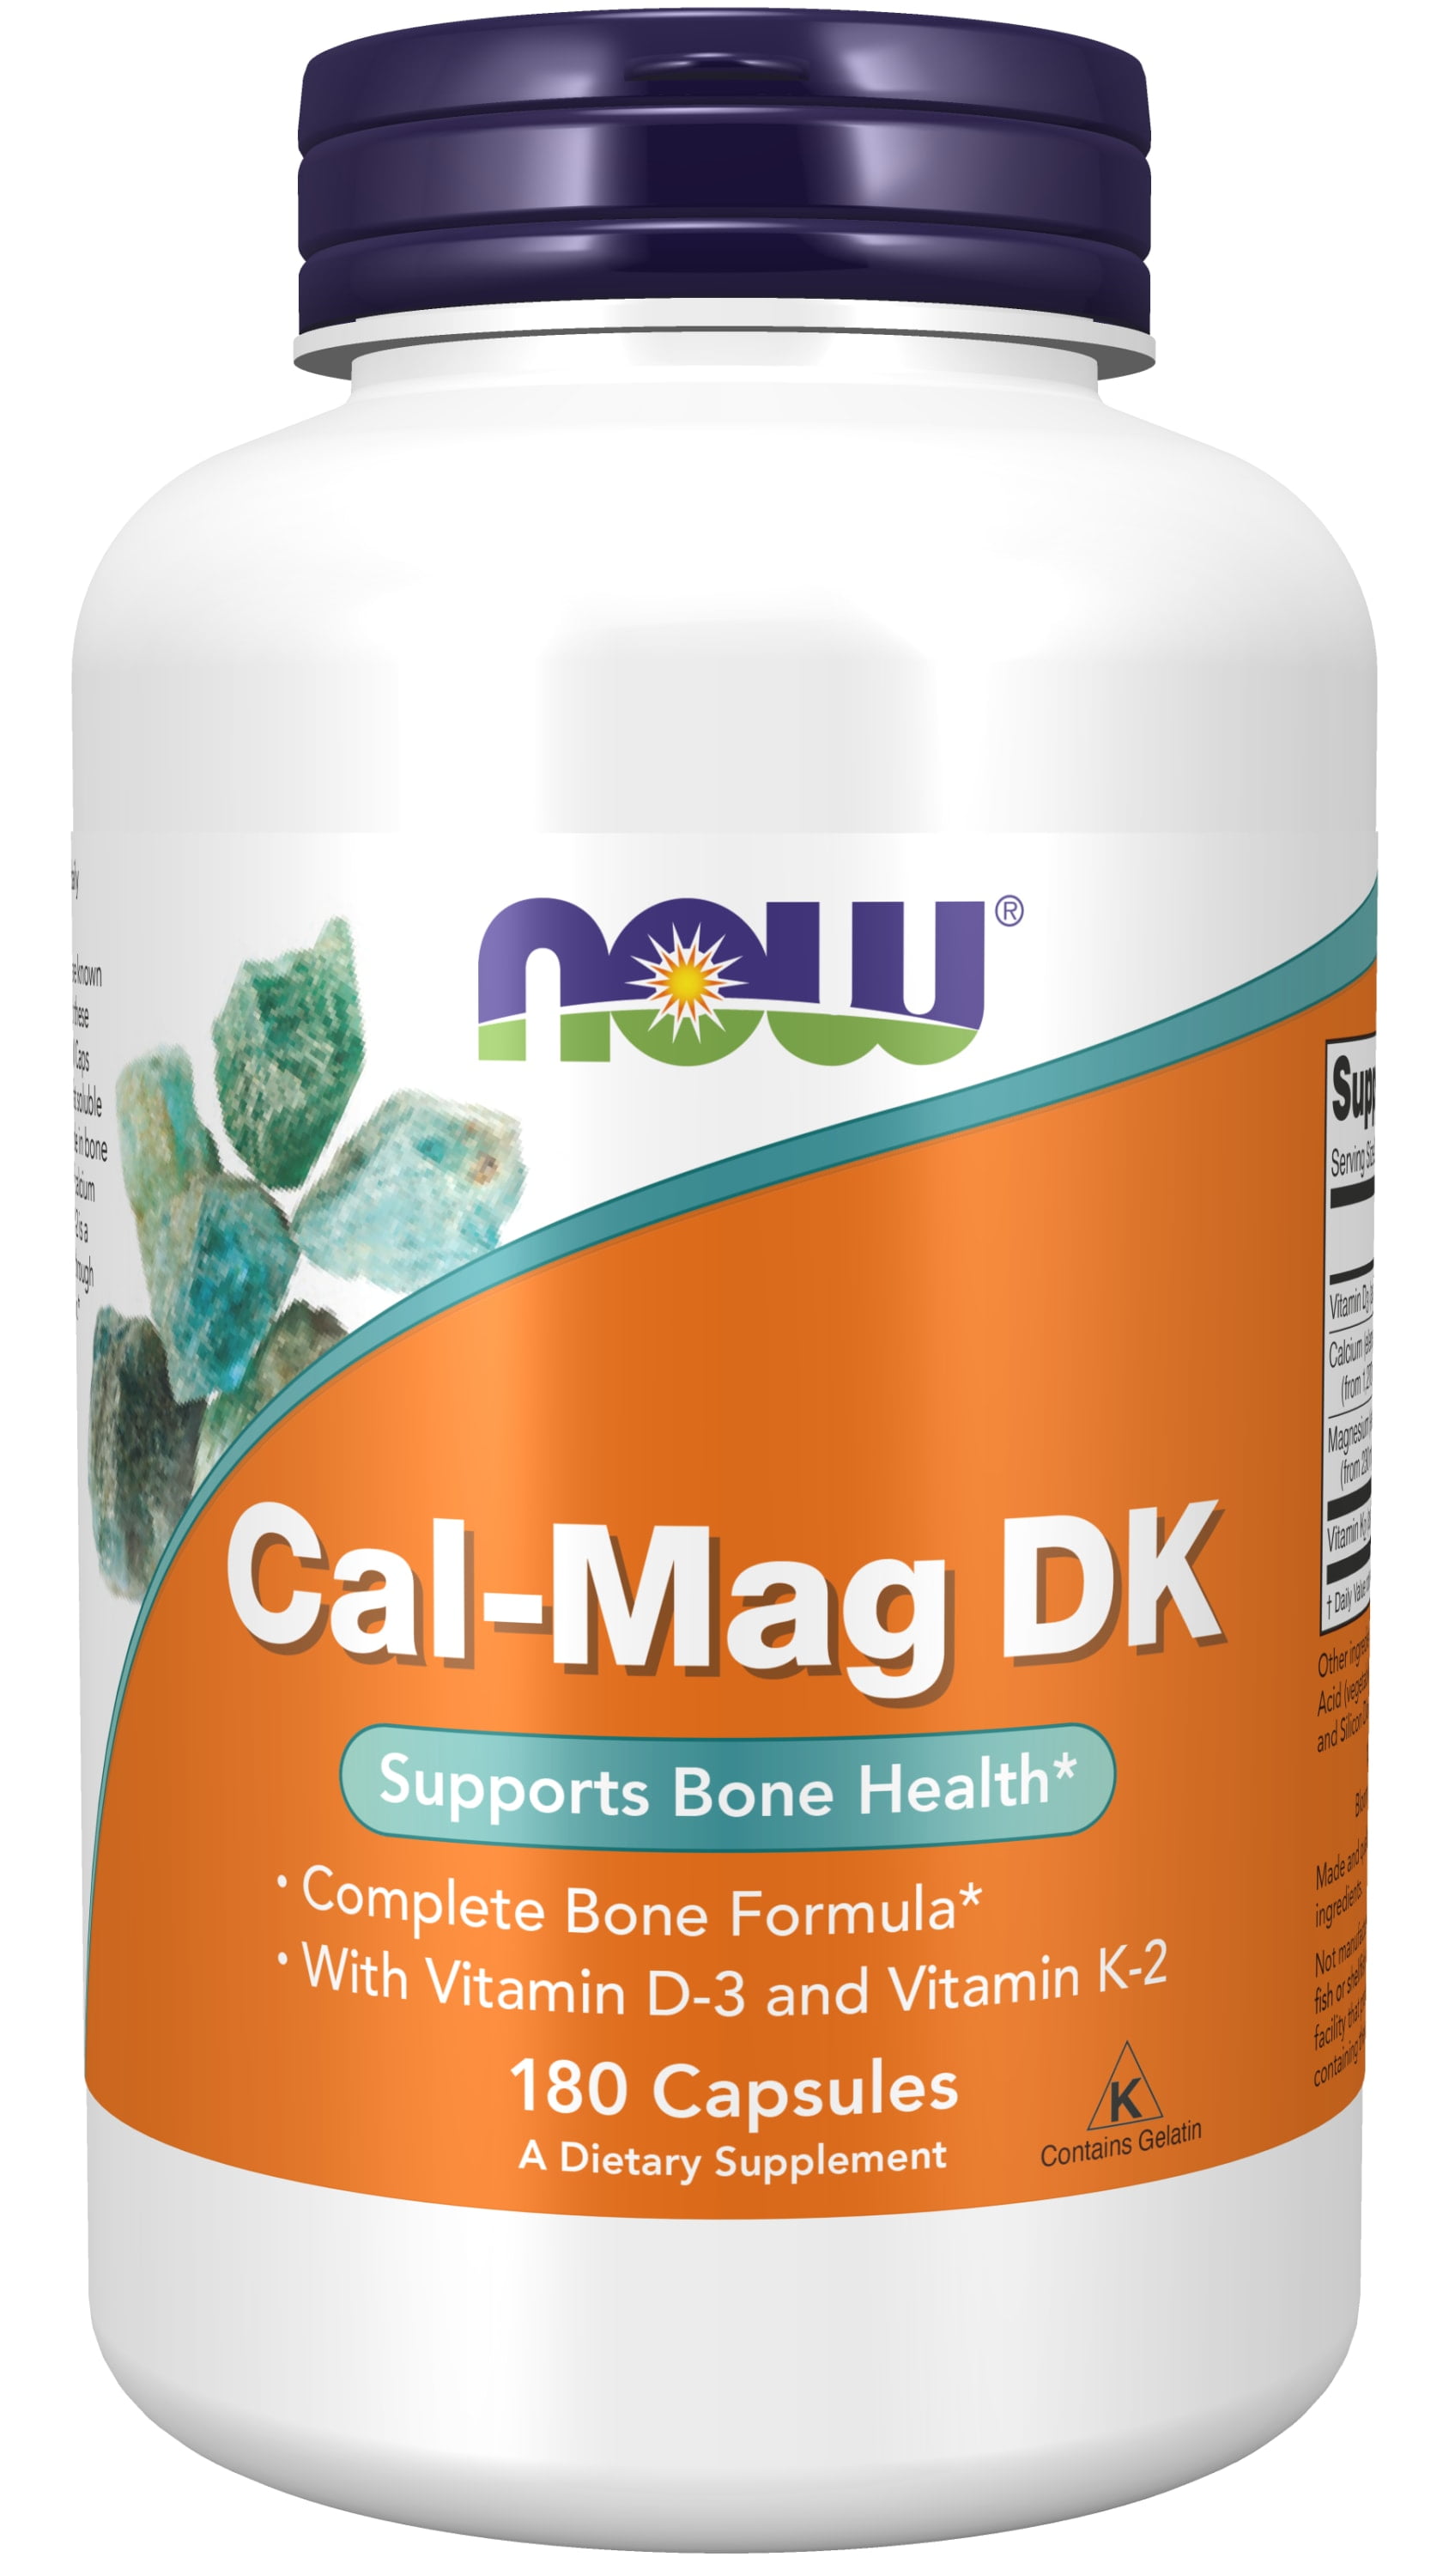 NOW Supplements, Cal-Mag DK with Vitamin D-3 and Vitamin K-2, Supports Bone Health*, 180 Capsules Sale